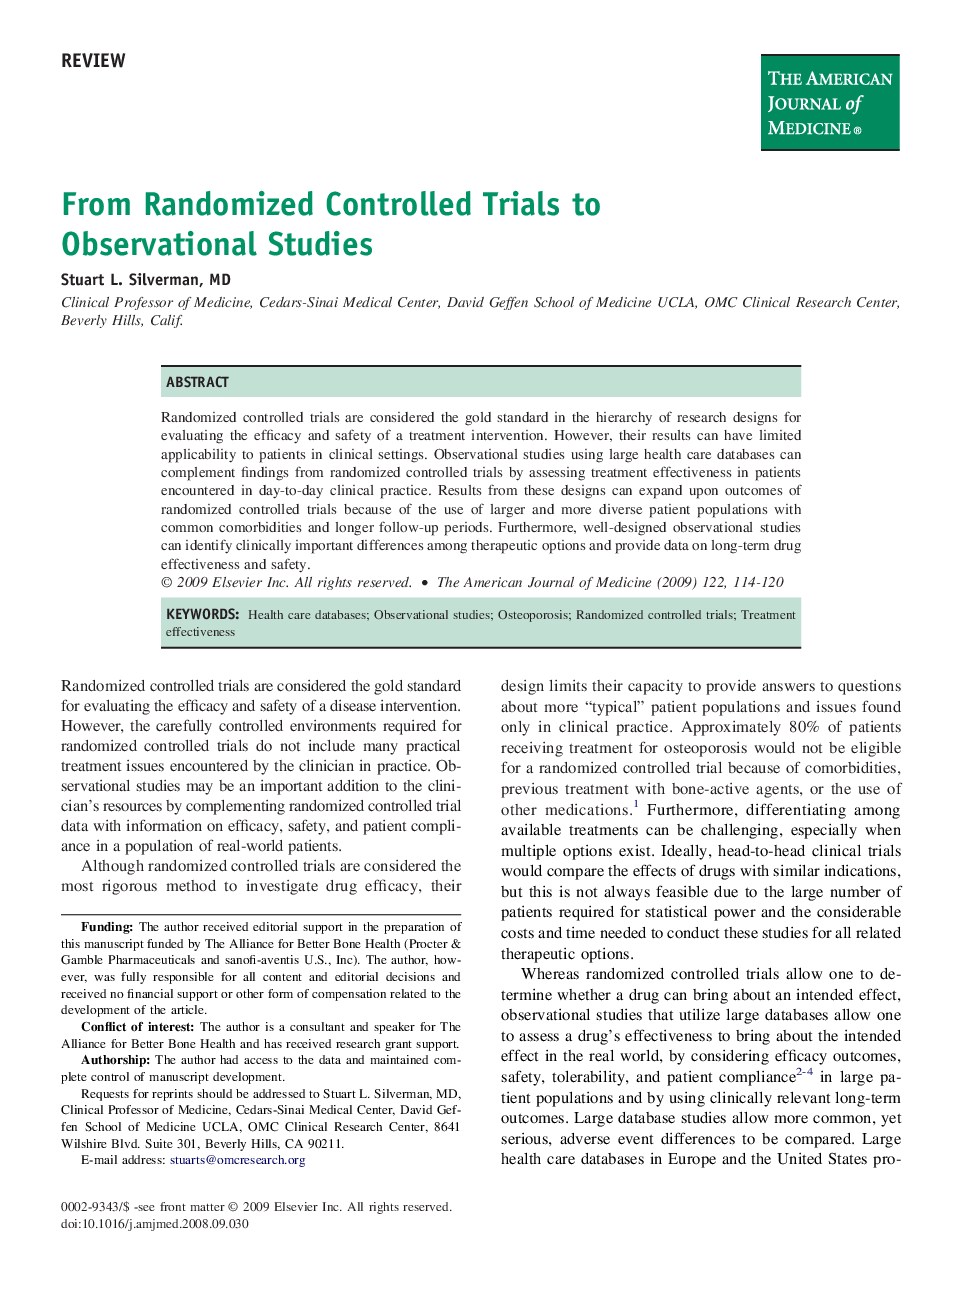 From Randomized Controlled Trials to Observational Studies 